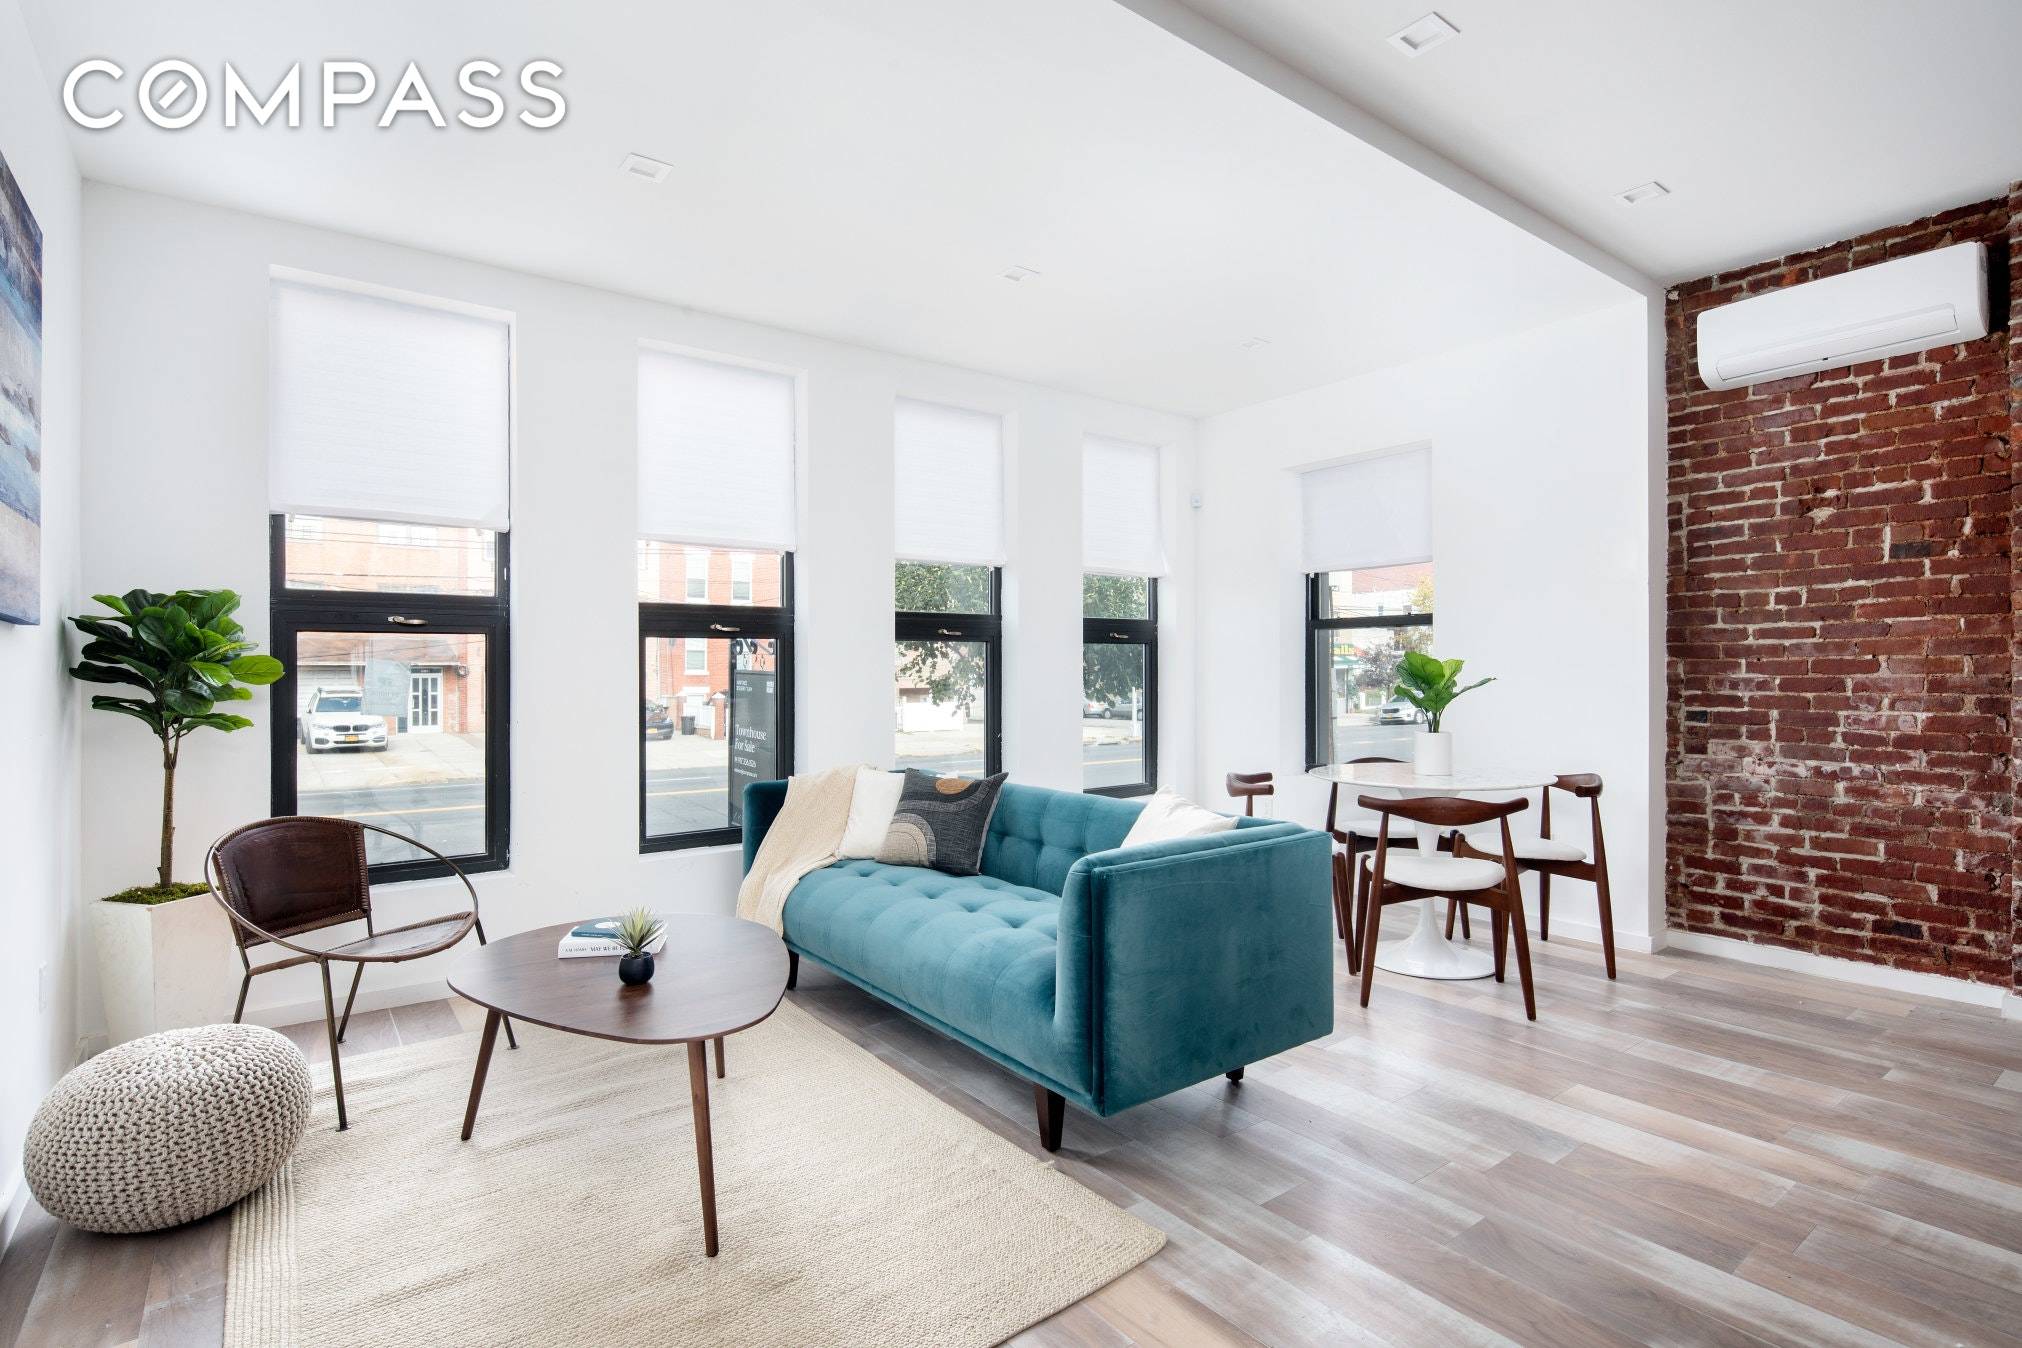 Introducing 2533 21st street A meticulously gut renovated and reimagined inside and out, this stunning two family home offers an ideal opportunity for homeowners and investors, with room to expand, ...